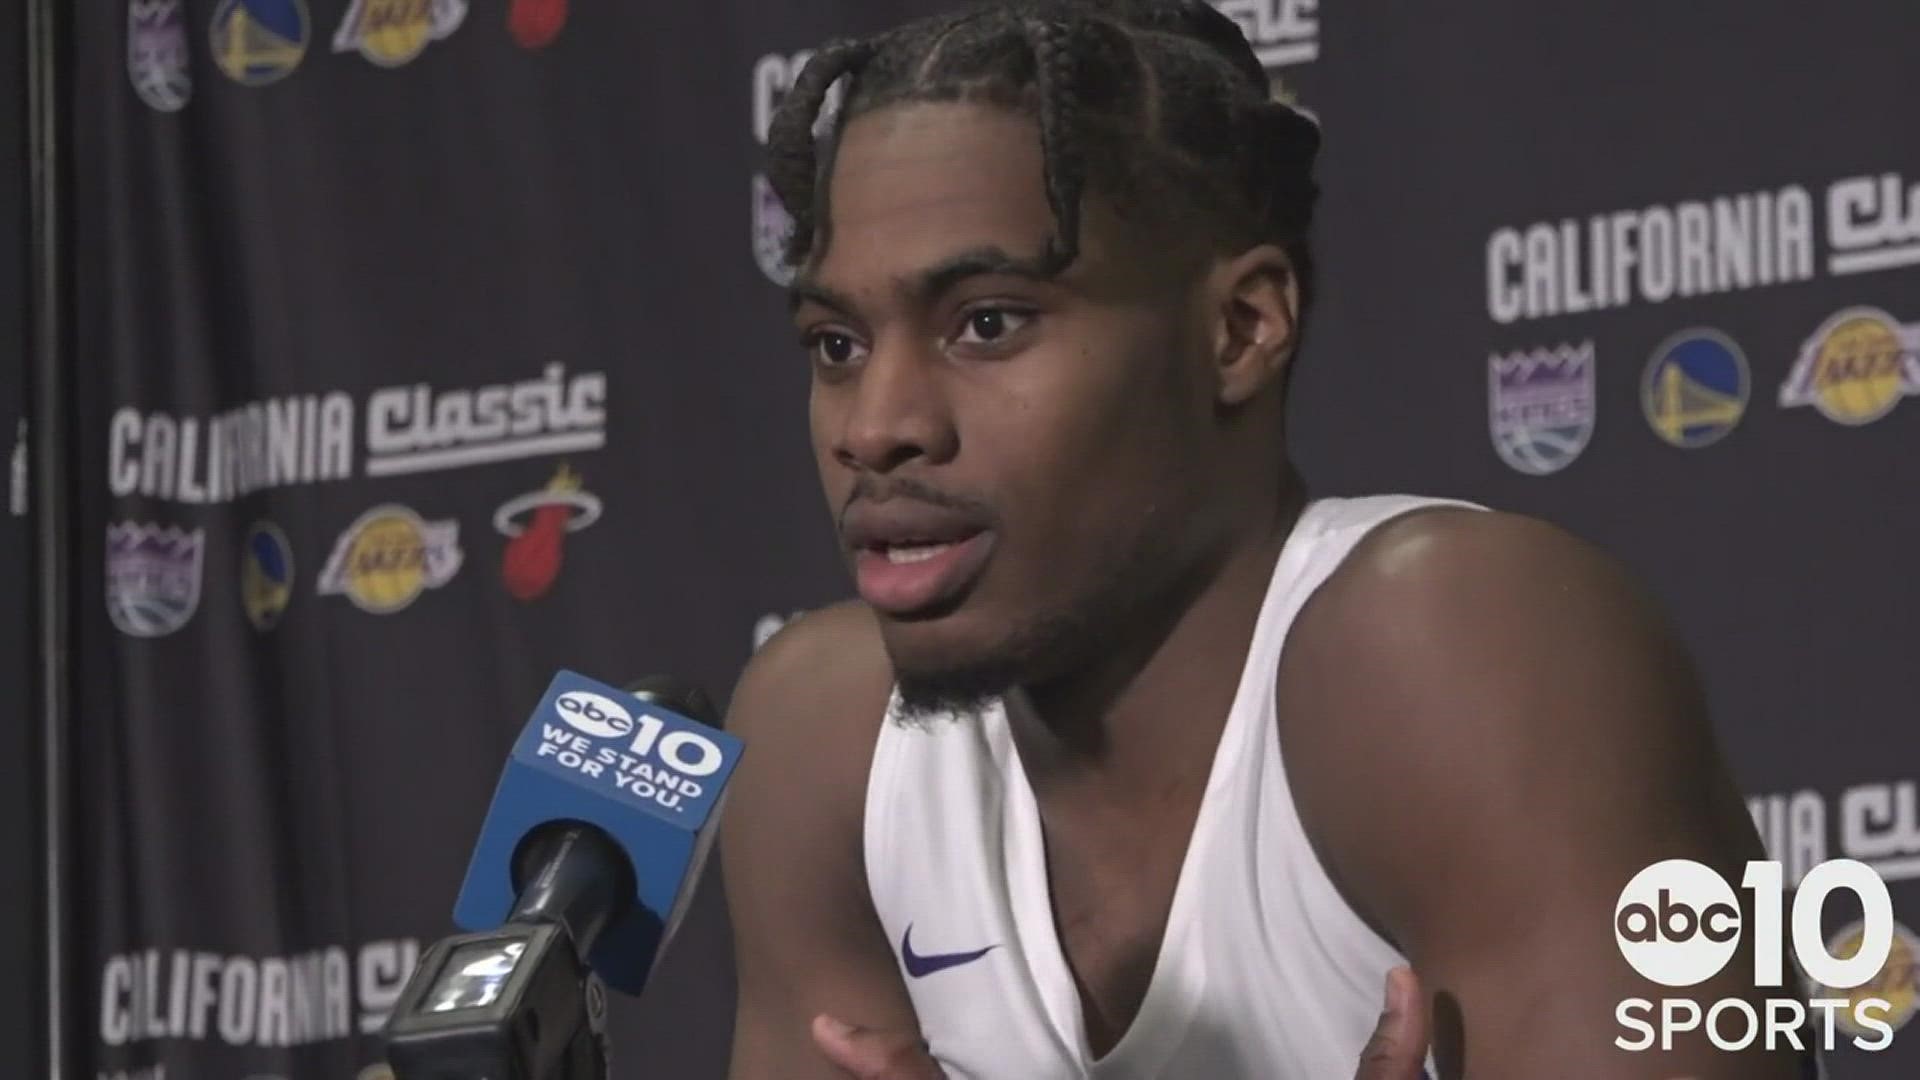 Kings top draft pick Davion Mitchell talks about his first experience as an NBA player for the California Classic and the support he received from Sacramento fans.